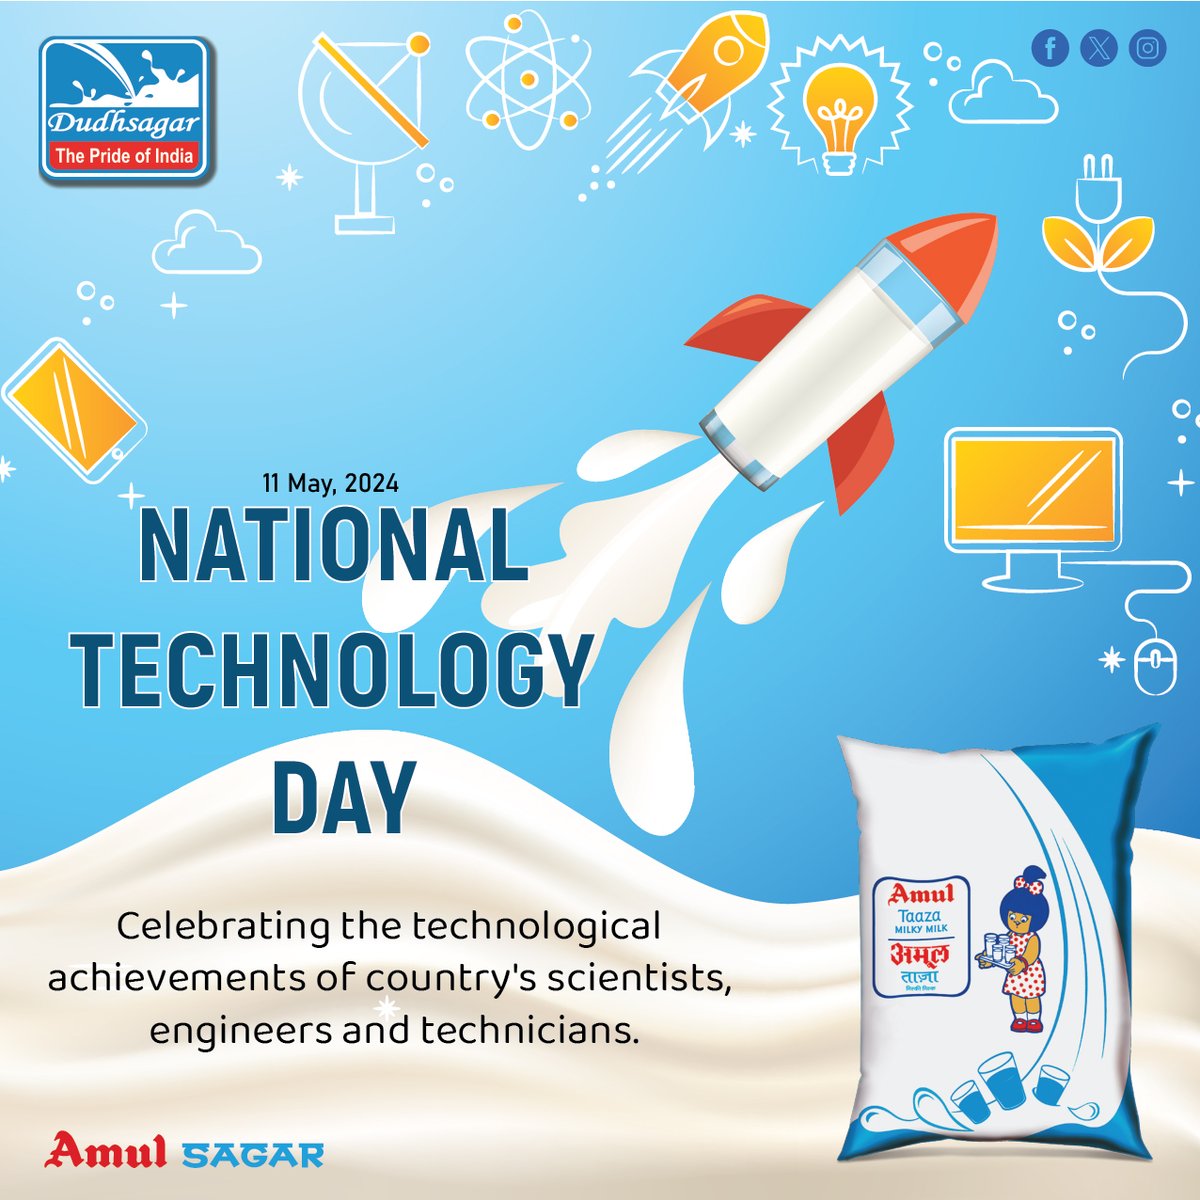 #NationalTechnologyDay 🚀

Celebrating the technological achievements of country's scientists, engineers and technicians..
.
.
.
#dudhsagardairy #Amul #sagar #milk #dairyproduct #DairyIndia #dudhsagar #theprideofindia #stayhealthy #mehsana #gujarat #india #bharat